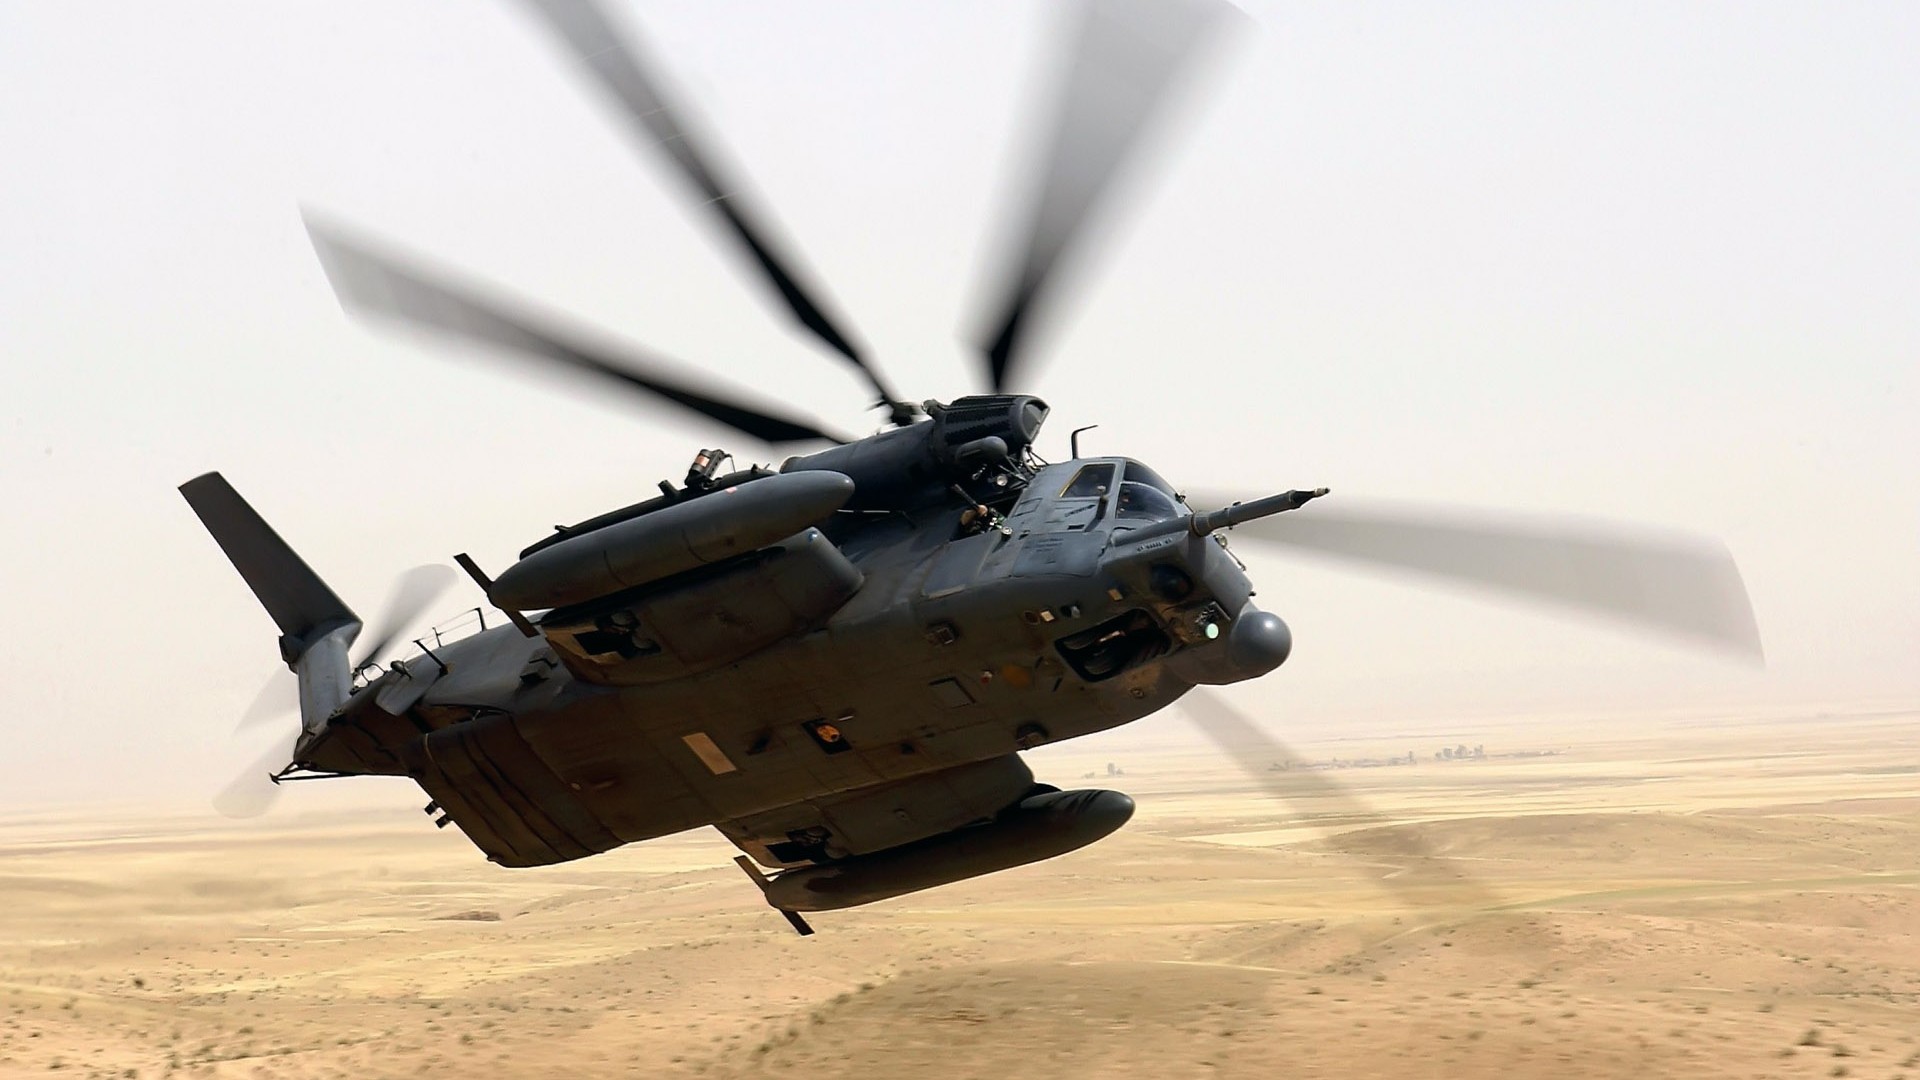 General 1920x1080 military aircraft sky Sikorsky MH-53 Pave Low military aircraft vehicle military vehicle helicopters US Air Force Iraq Second Gulf War 2003 (Year) flying desert